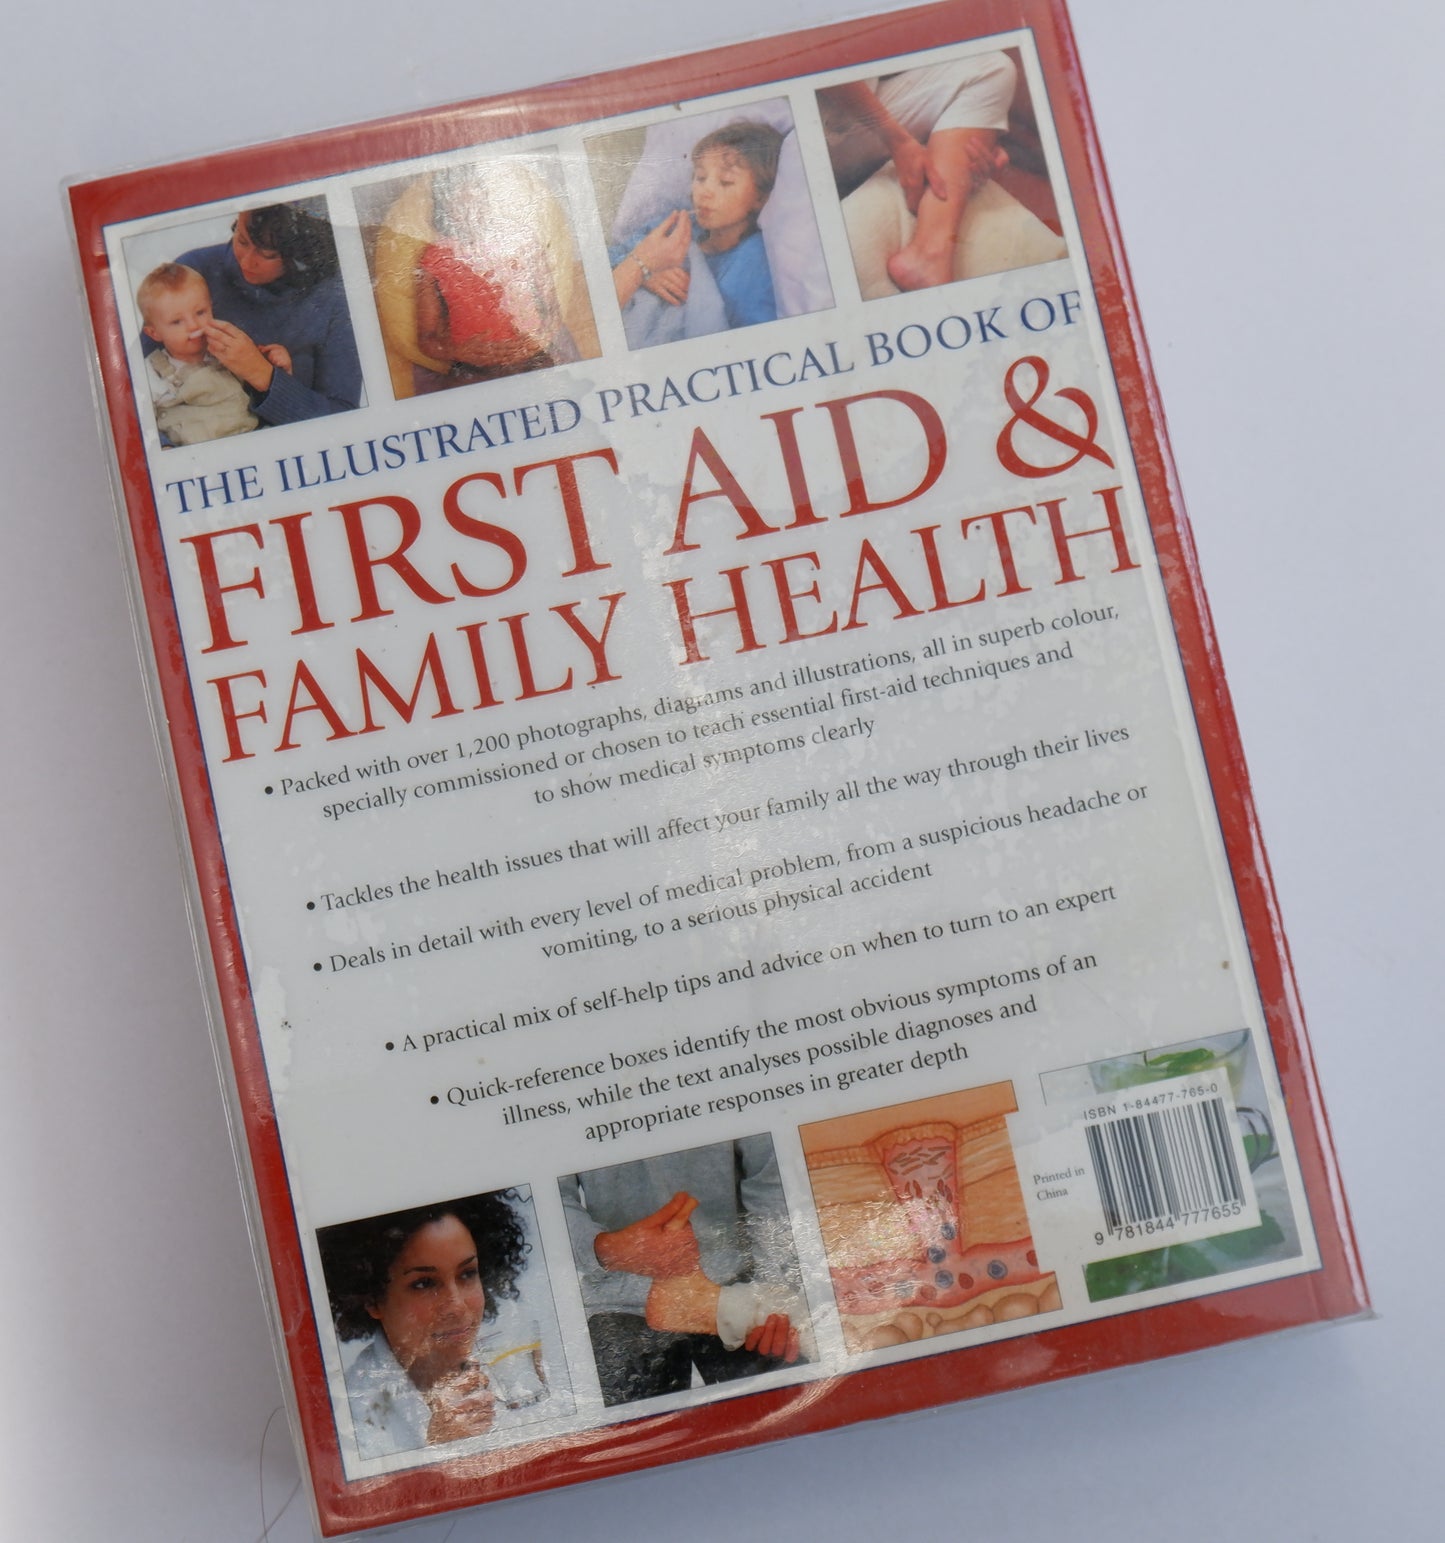 The Illustrated Practical Book of family Health and First Aid - Dr Peter Fermie